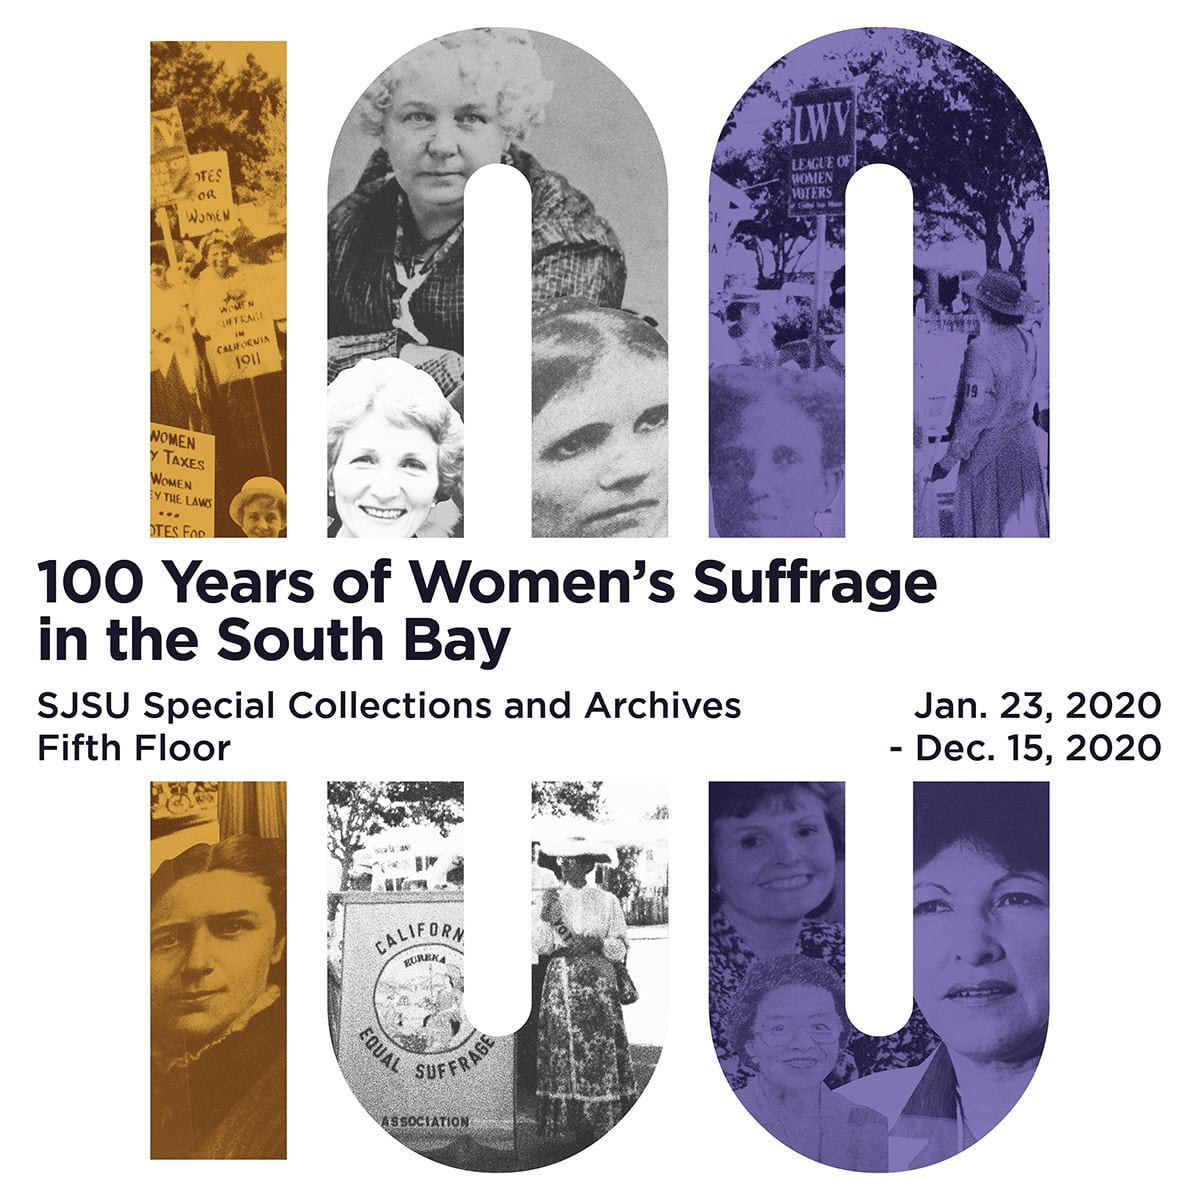 100 Years of Women's Suffrage